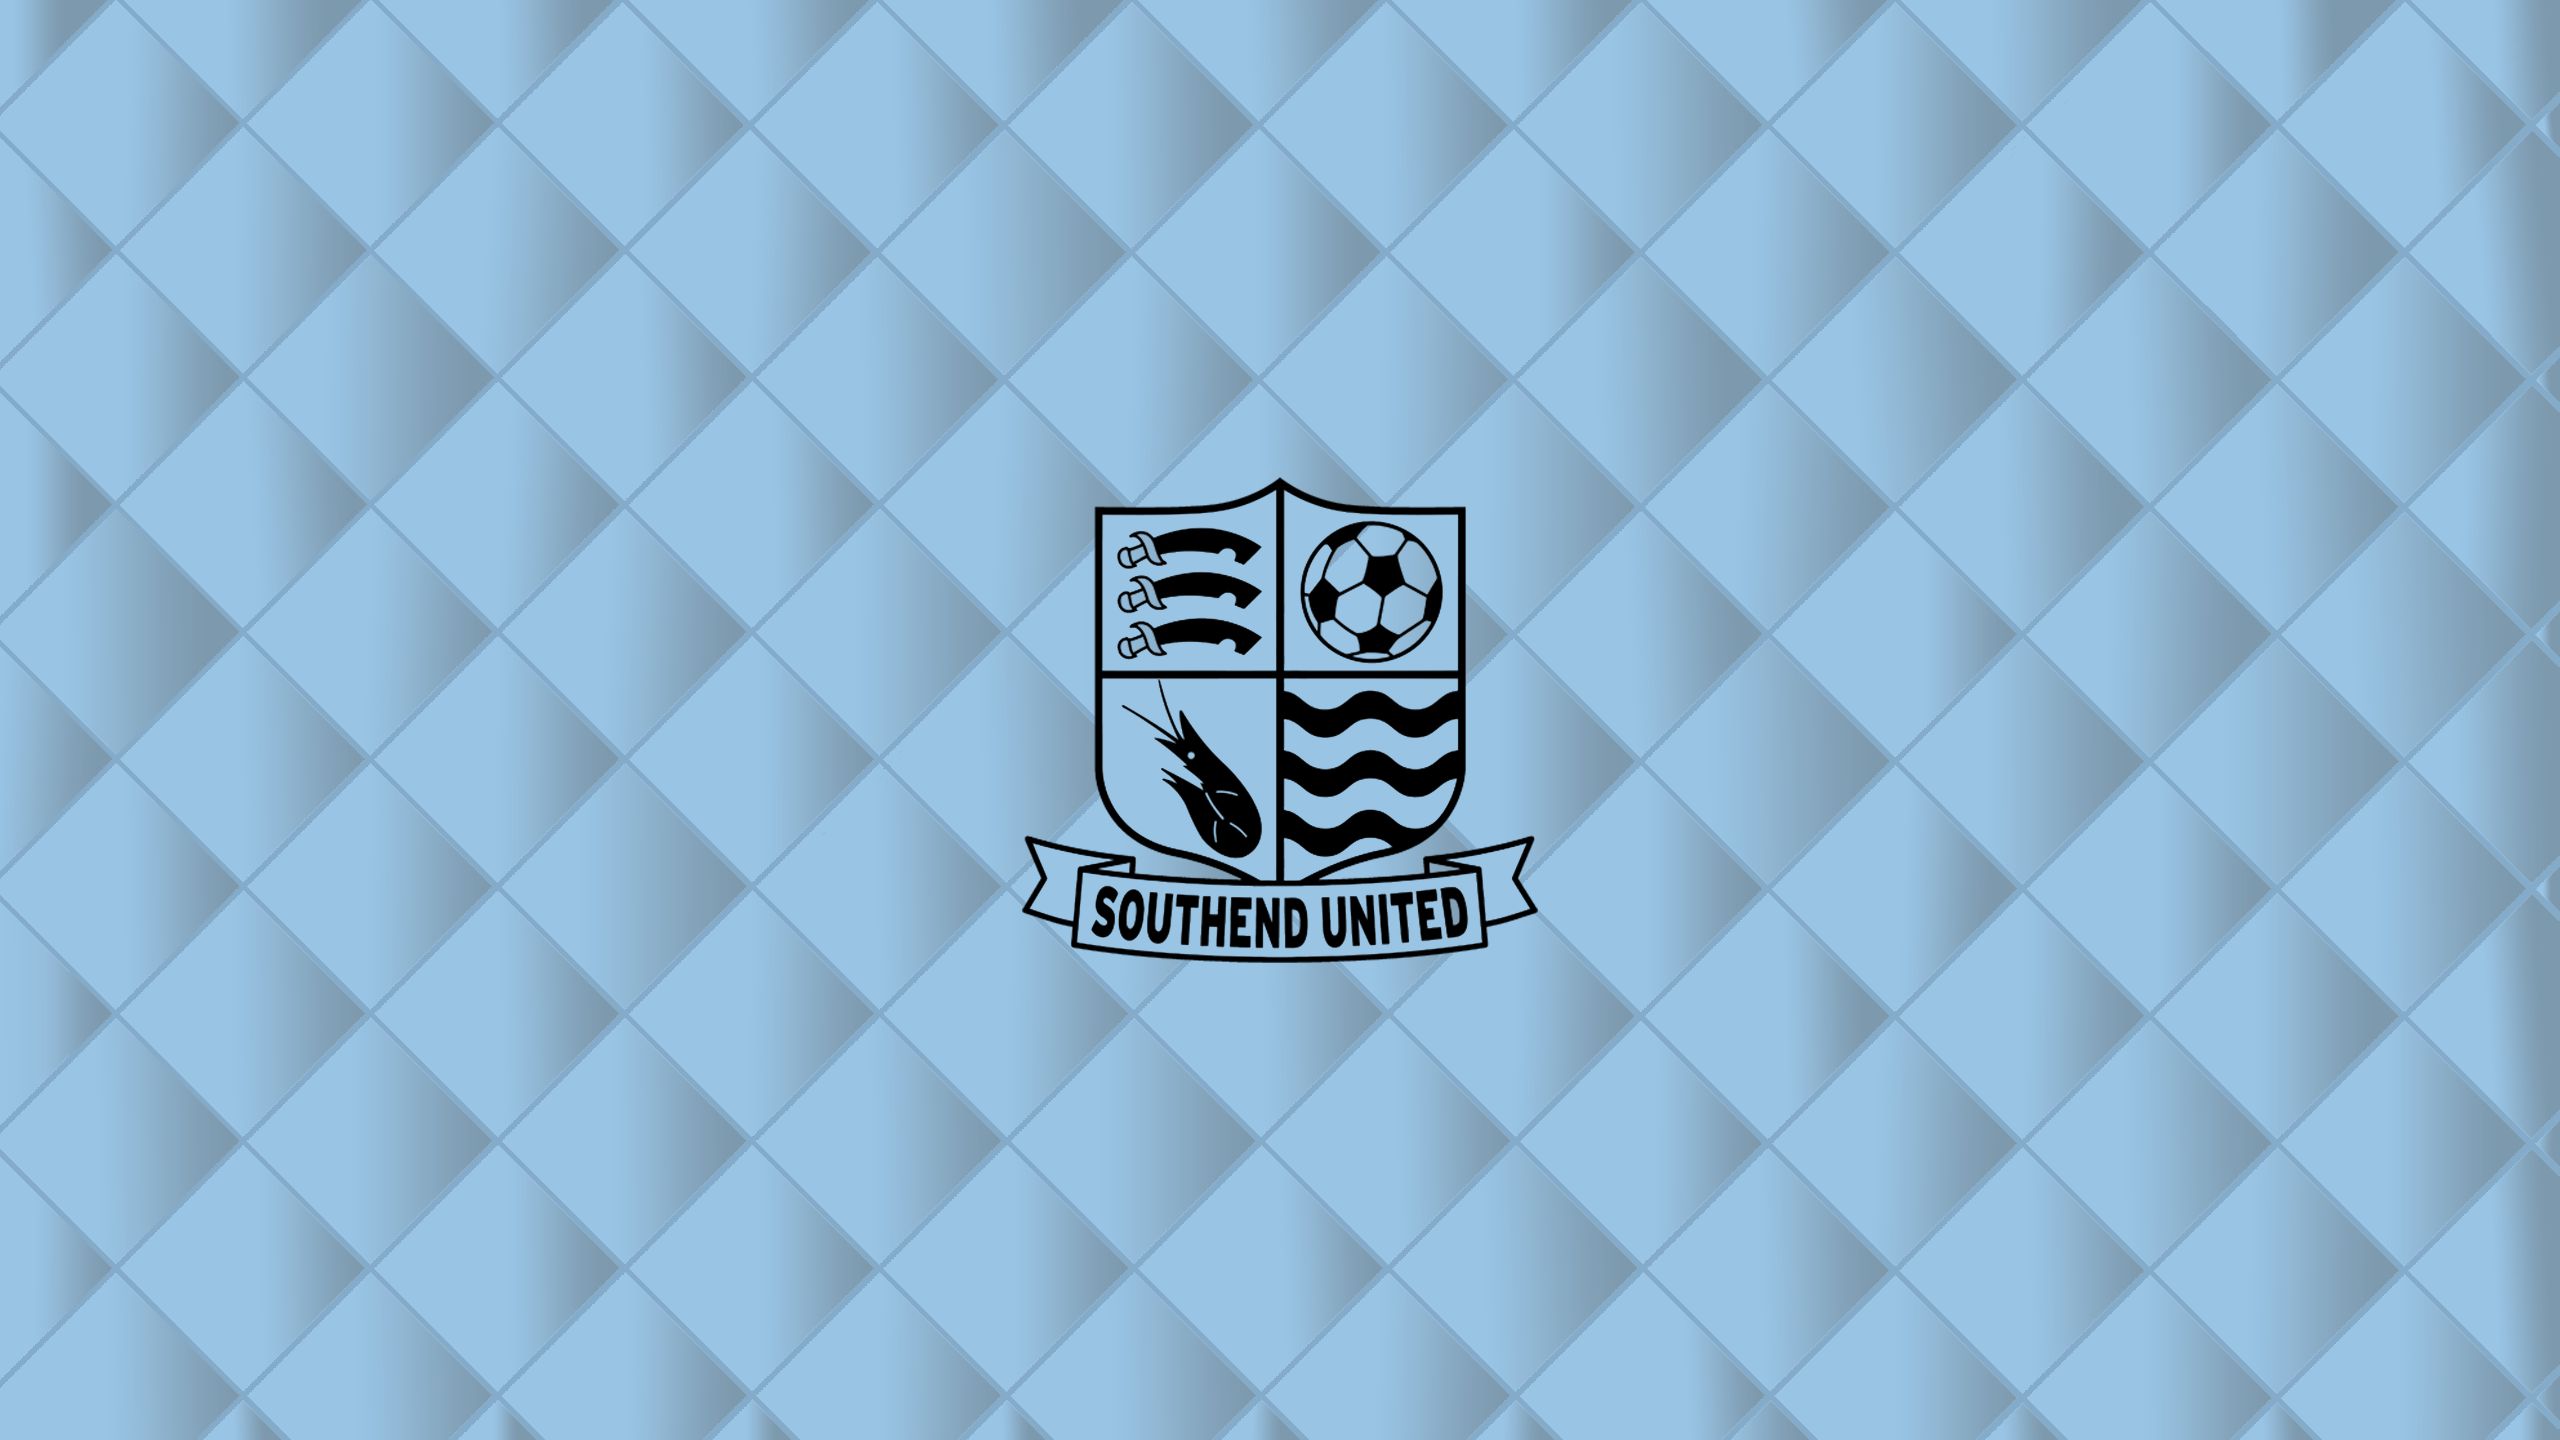 Southend United F C cellphone Wallpaper